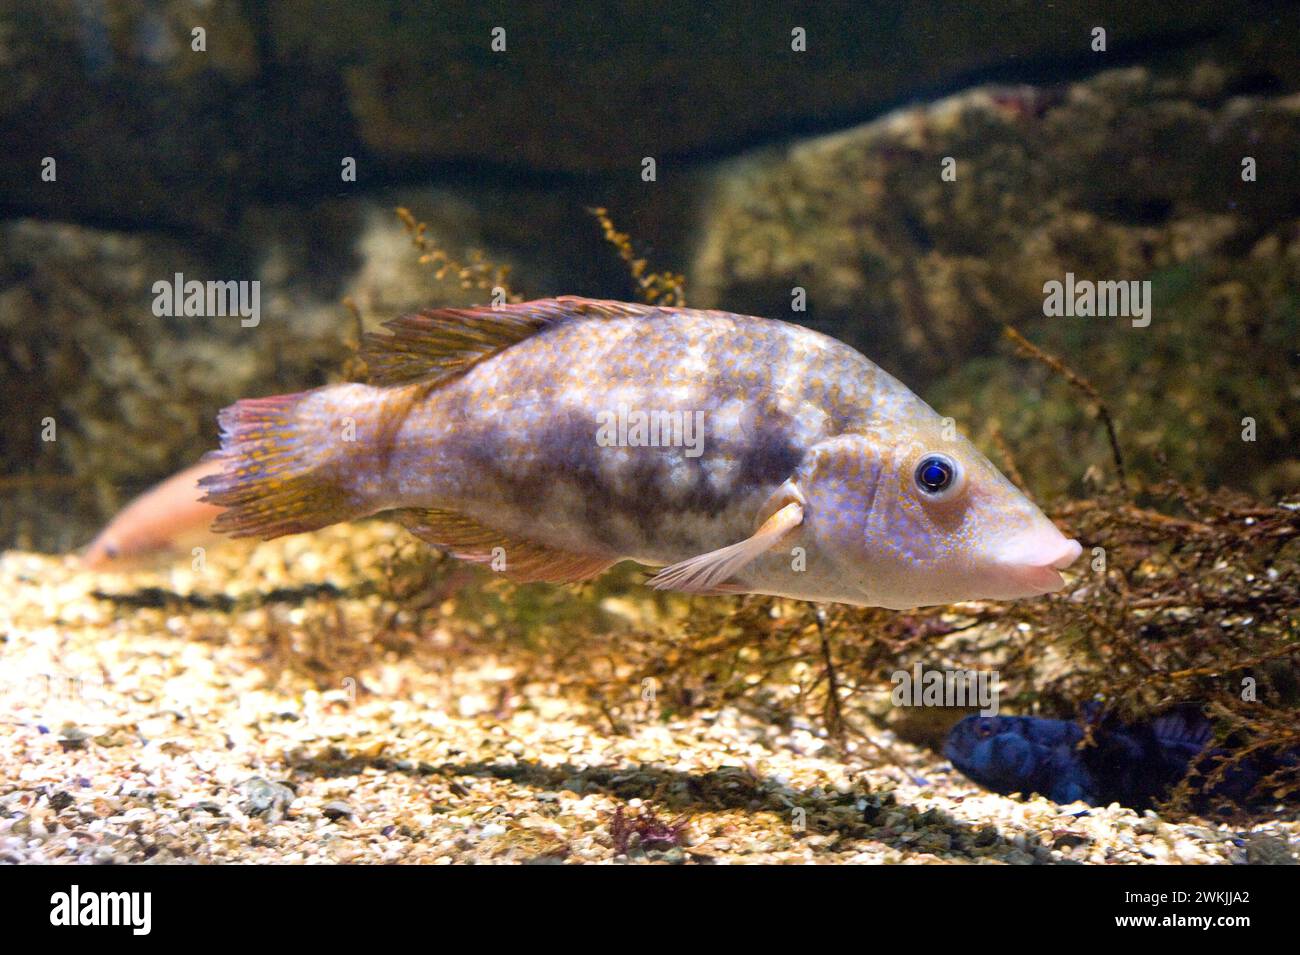 Corkwing wrass (Symphodus melops) is a marine fish native to Mediterranean Sea and eastern Atlantic Ocean, from Norway to Morocco. Stock Photo